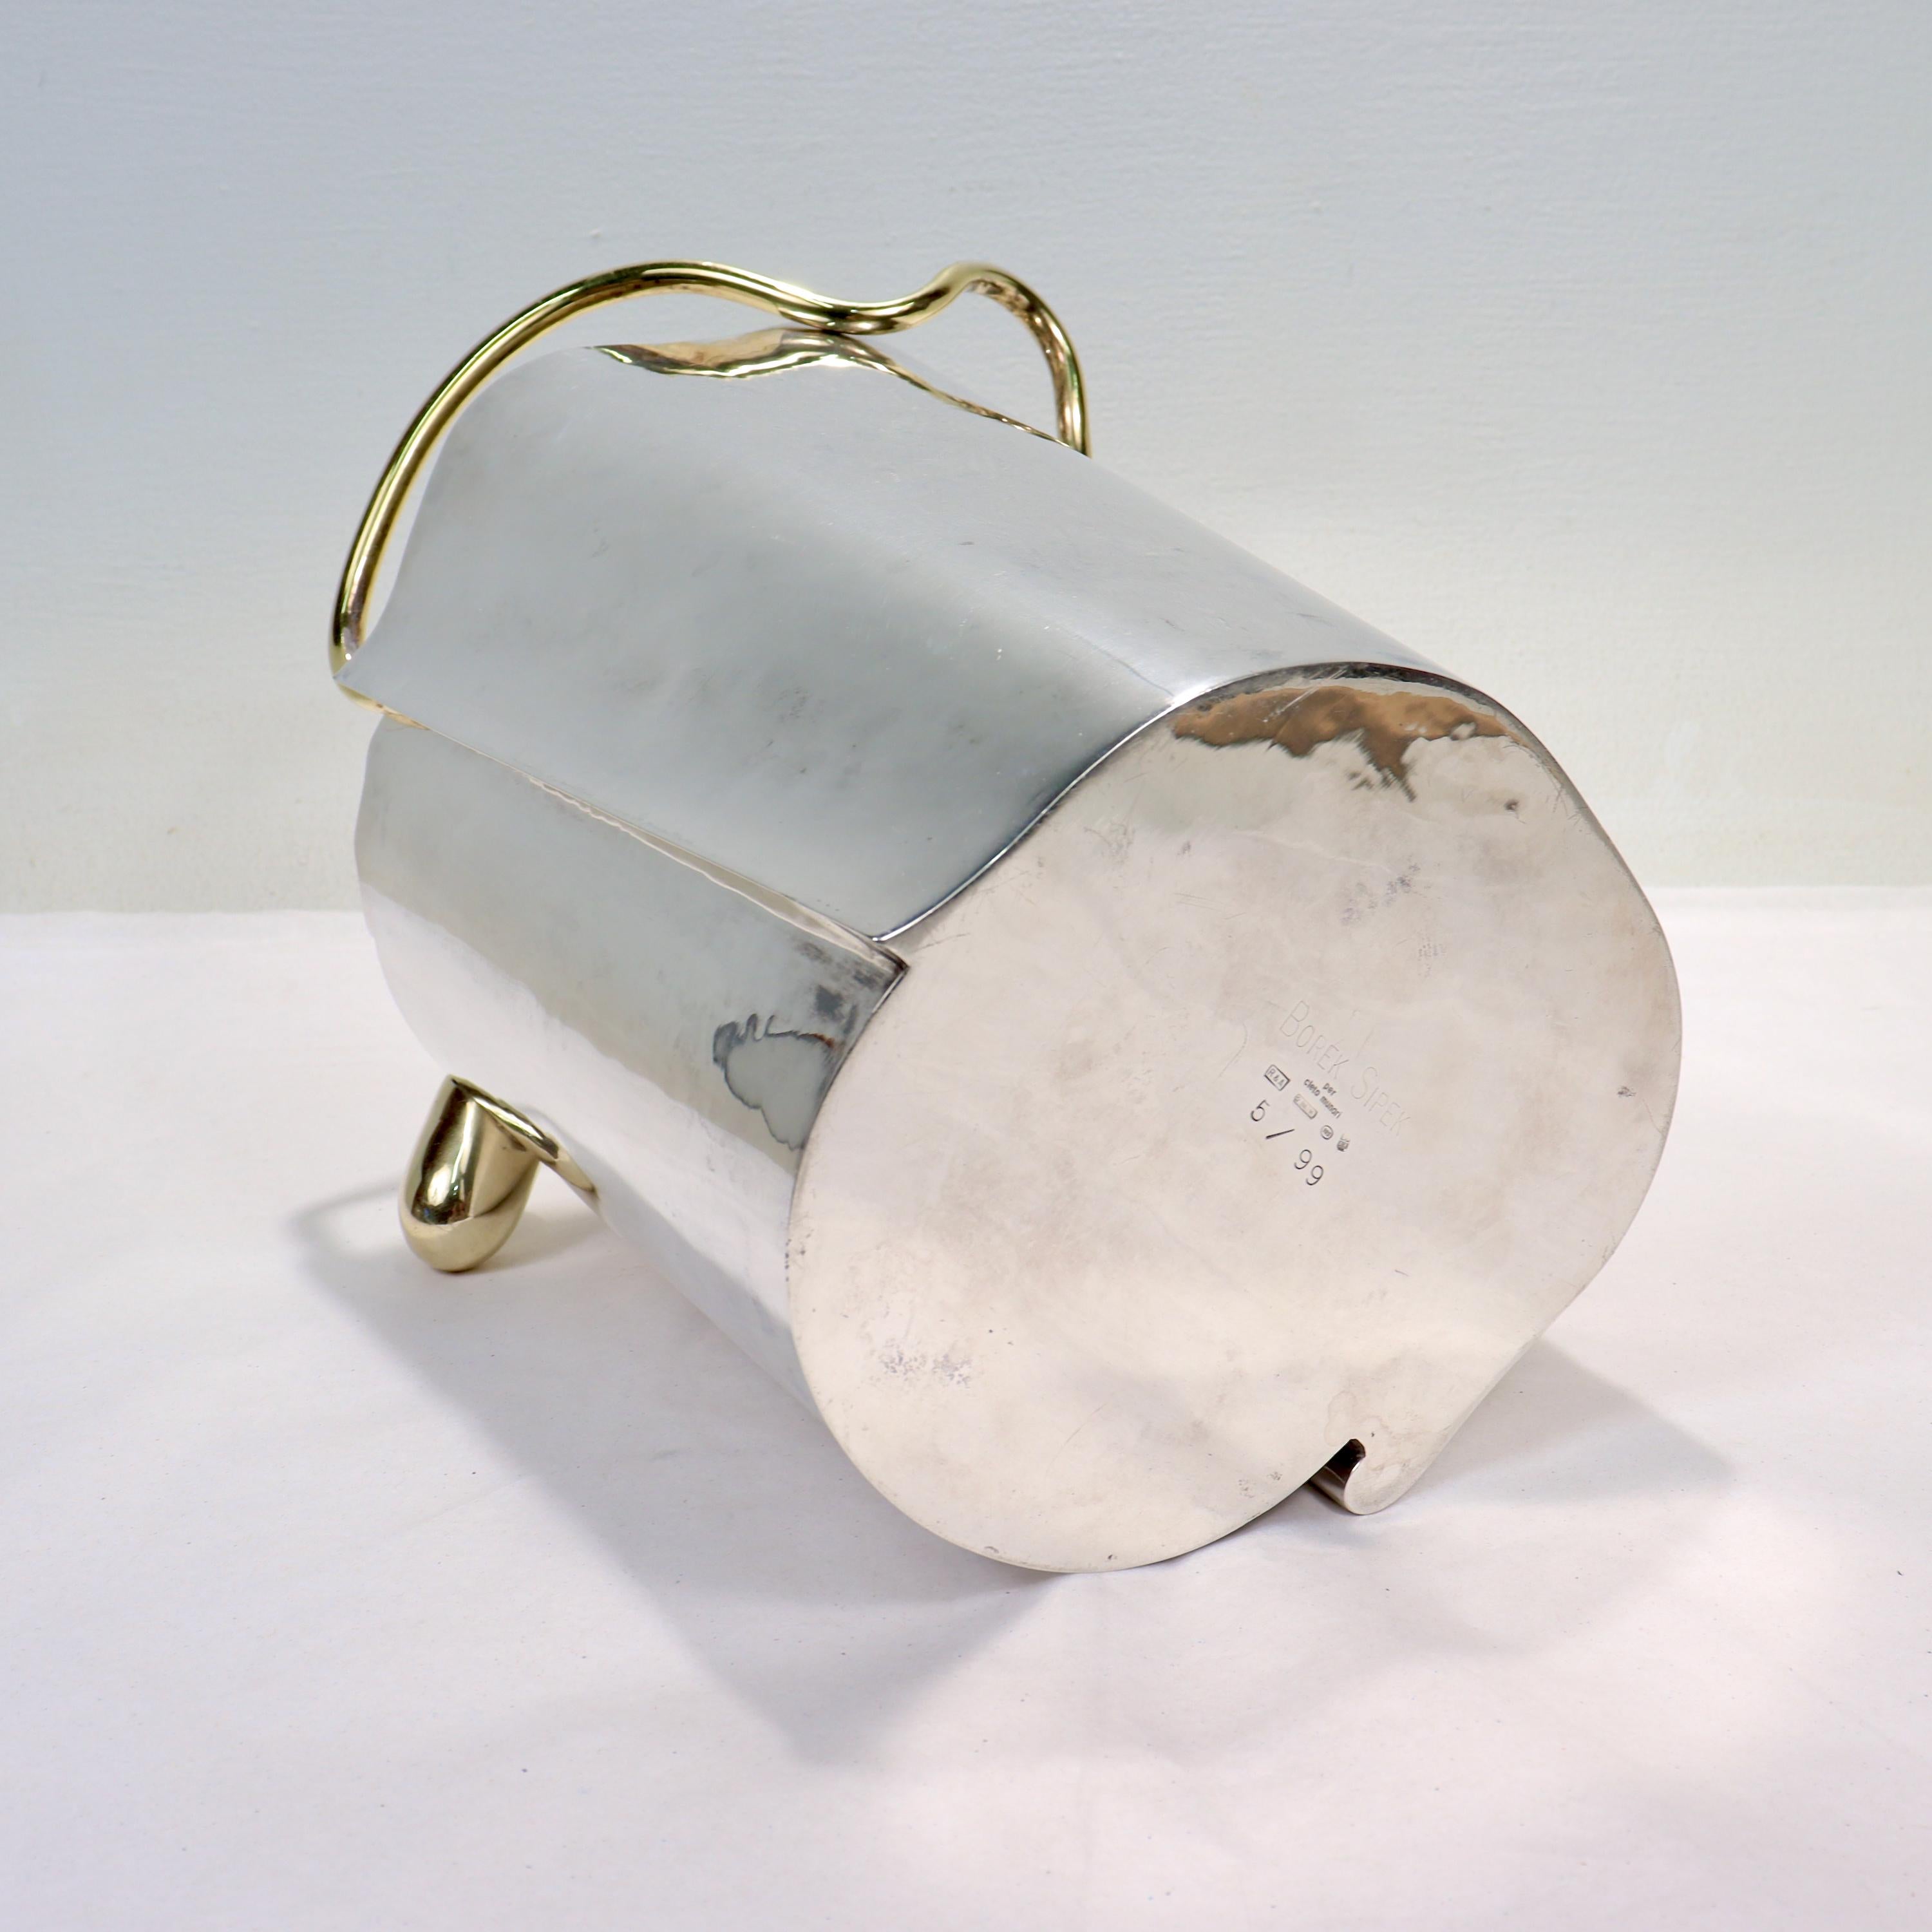 Modernist Sterling Silver Champagne / Ice Bucket by Borek Sipek for Cleto Munari For Sale 6